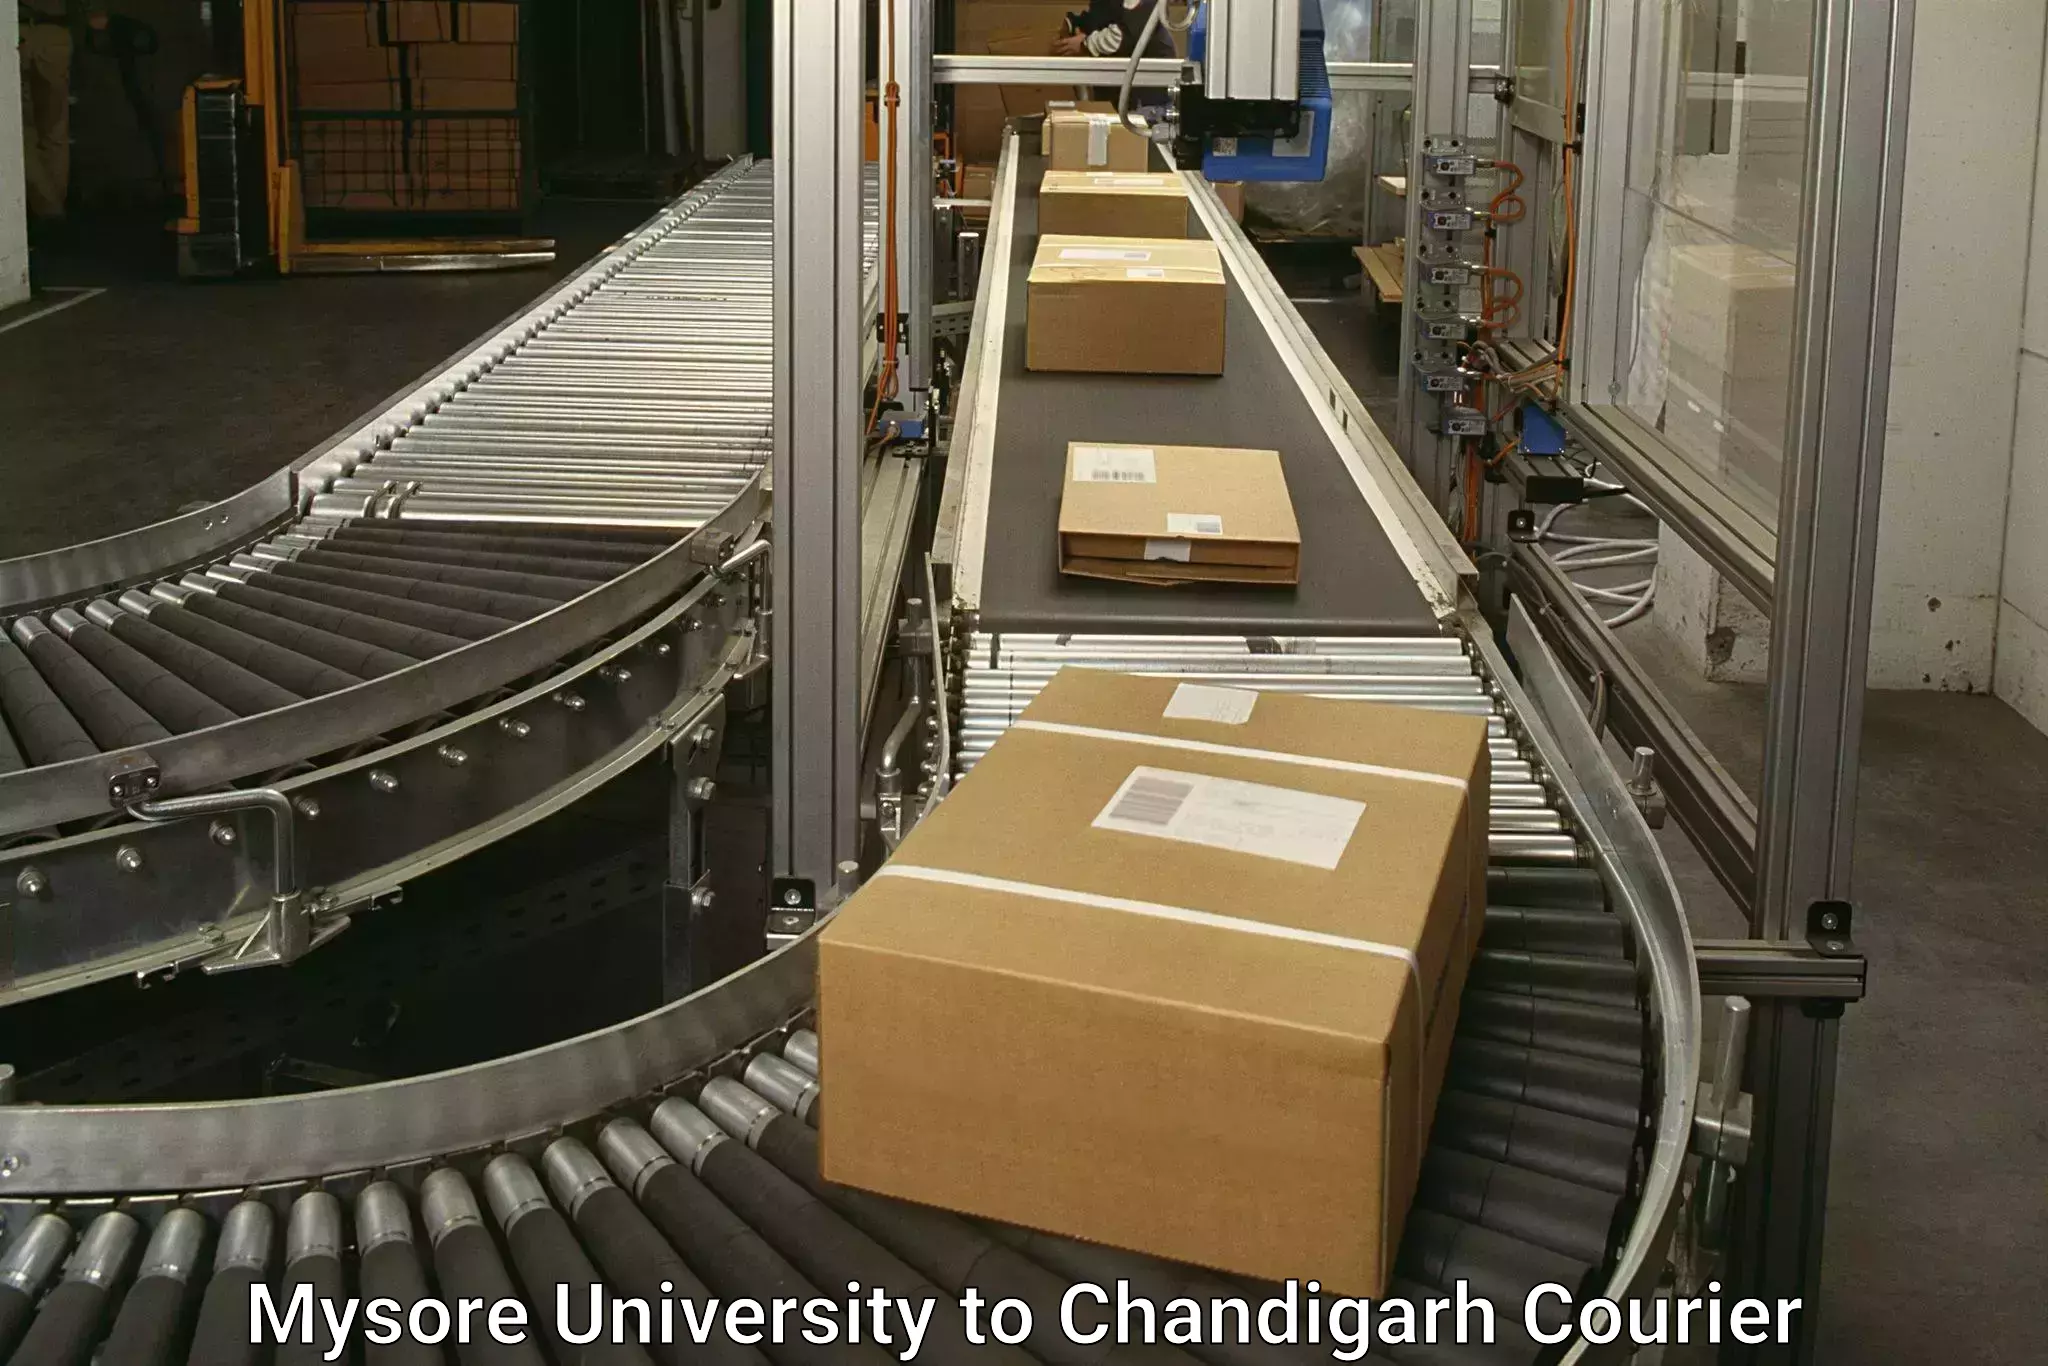 Special handling courier Mysore University to Chandigarh